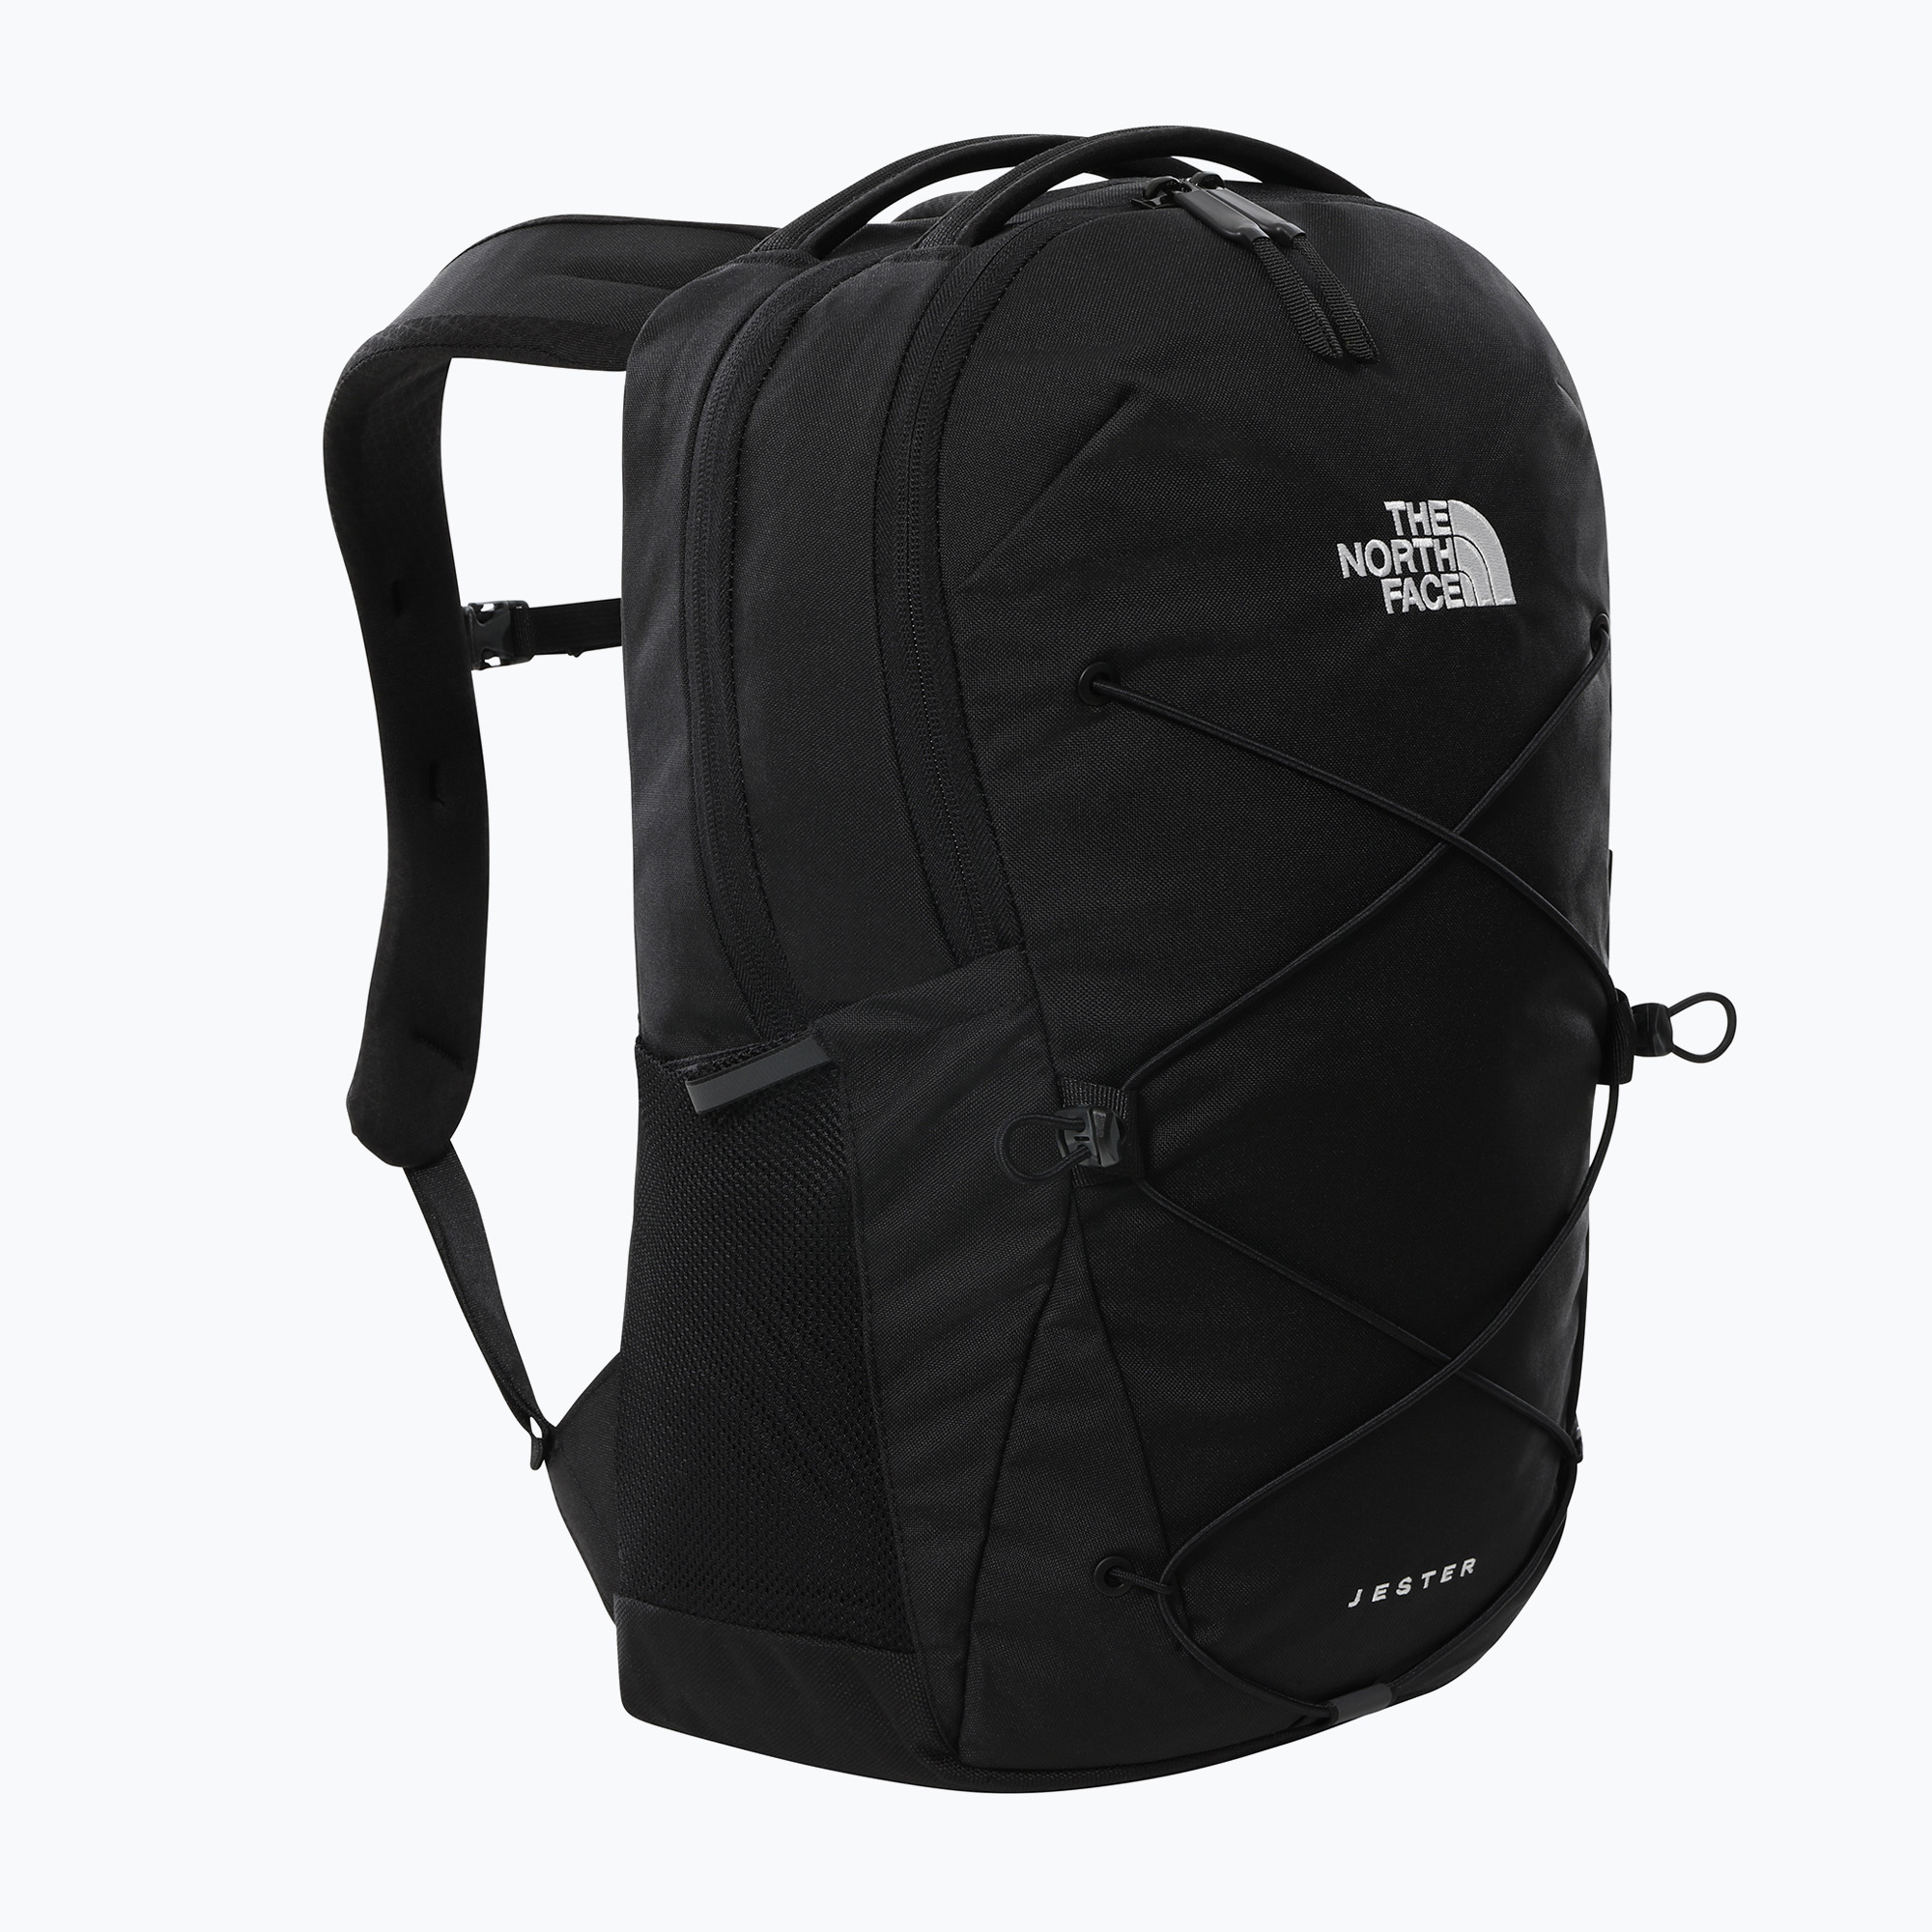 The North Face Jester 28 л черна градска раница